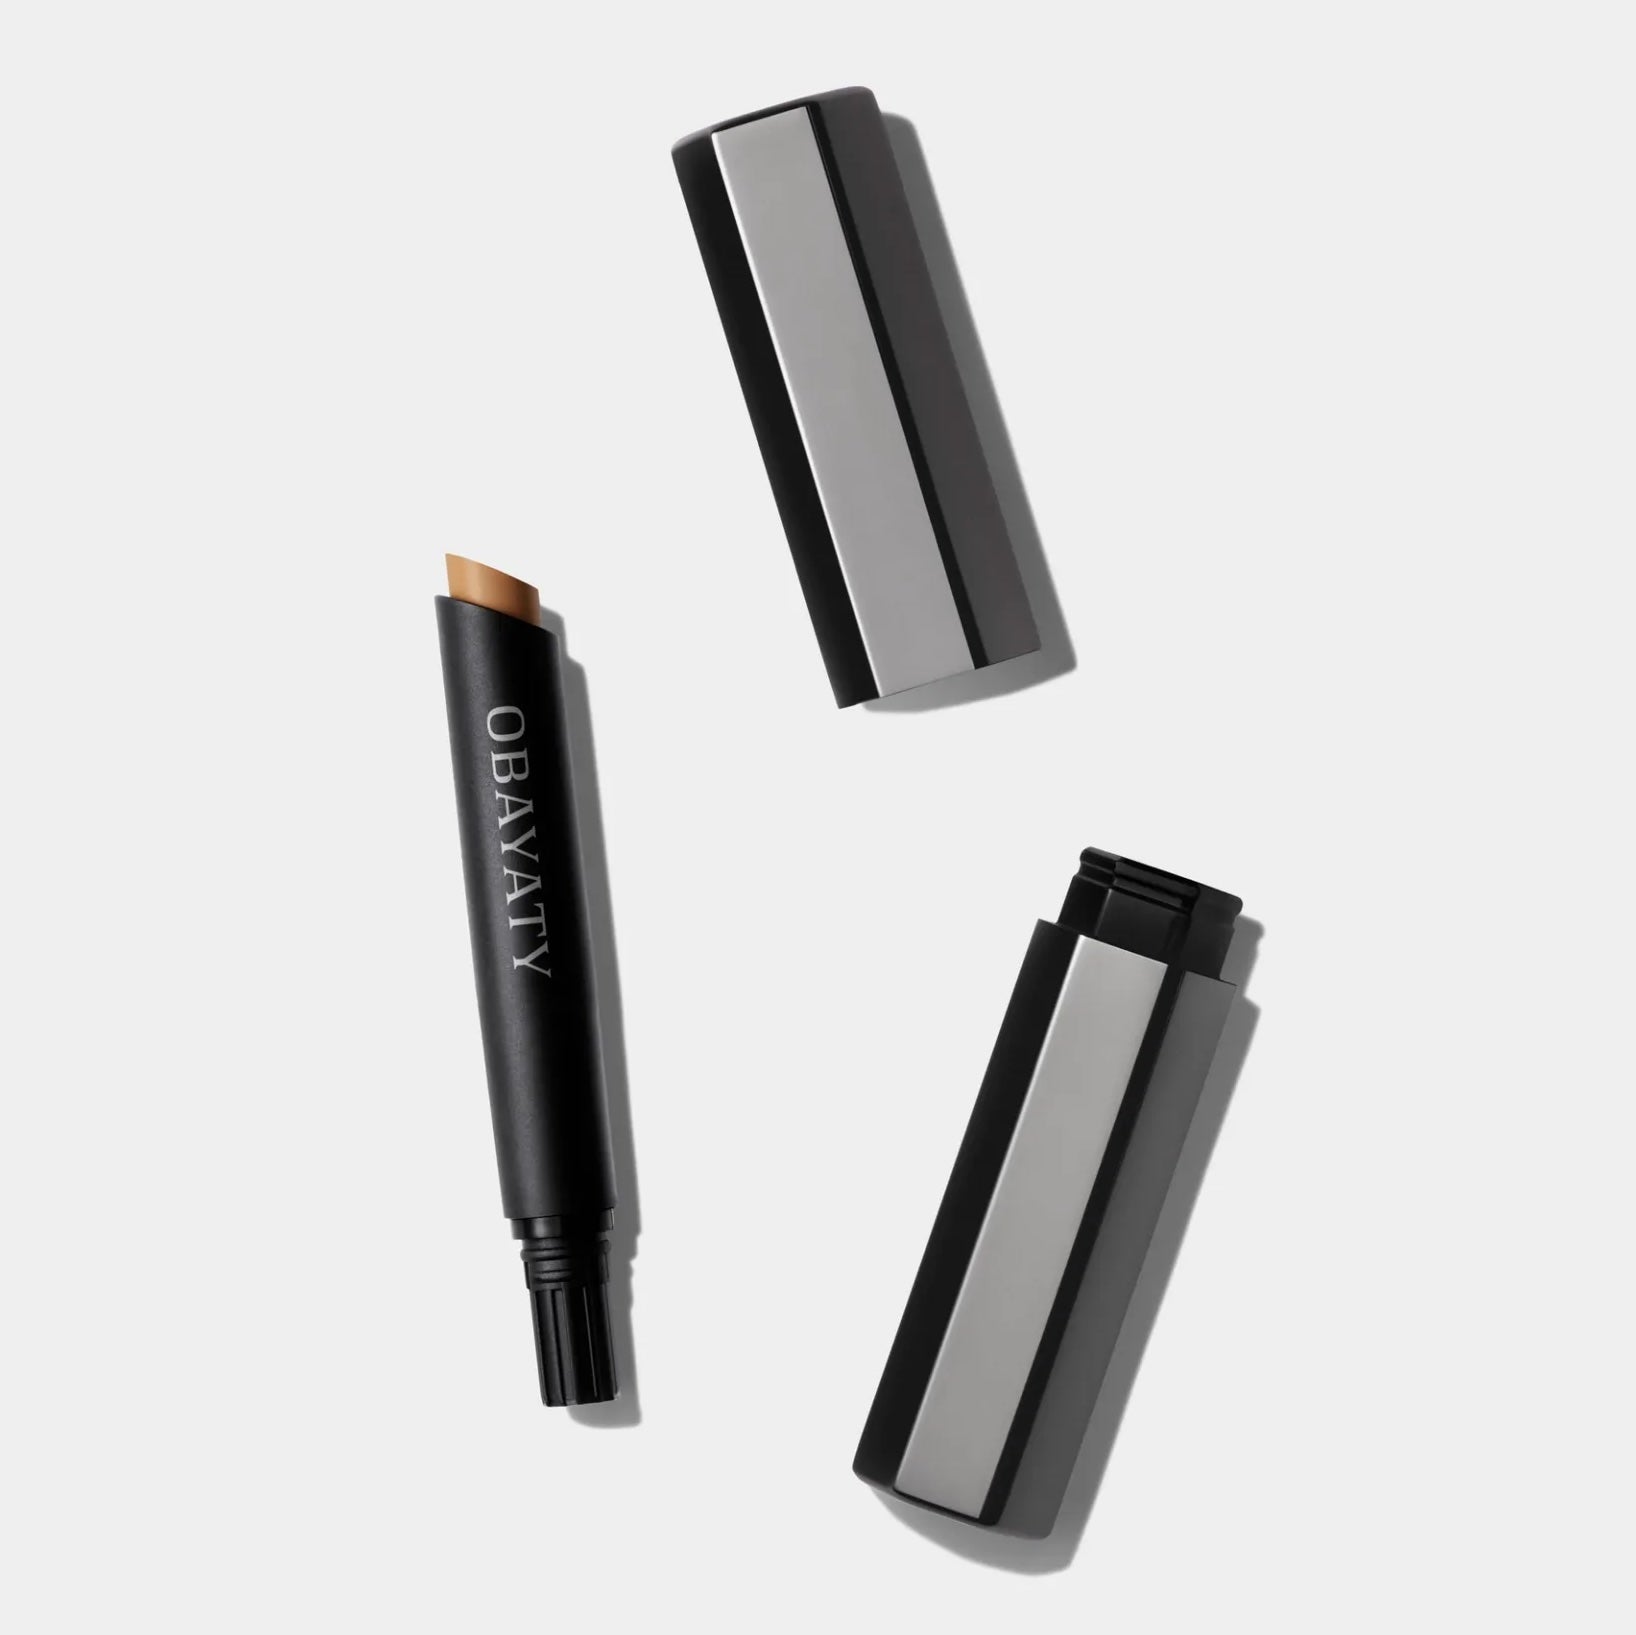 Obayaty Retouch Stick - The Concealer